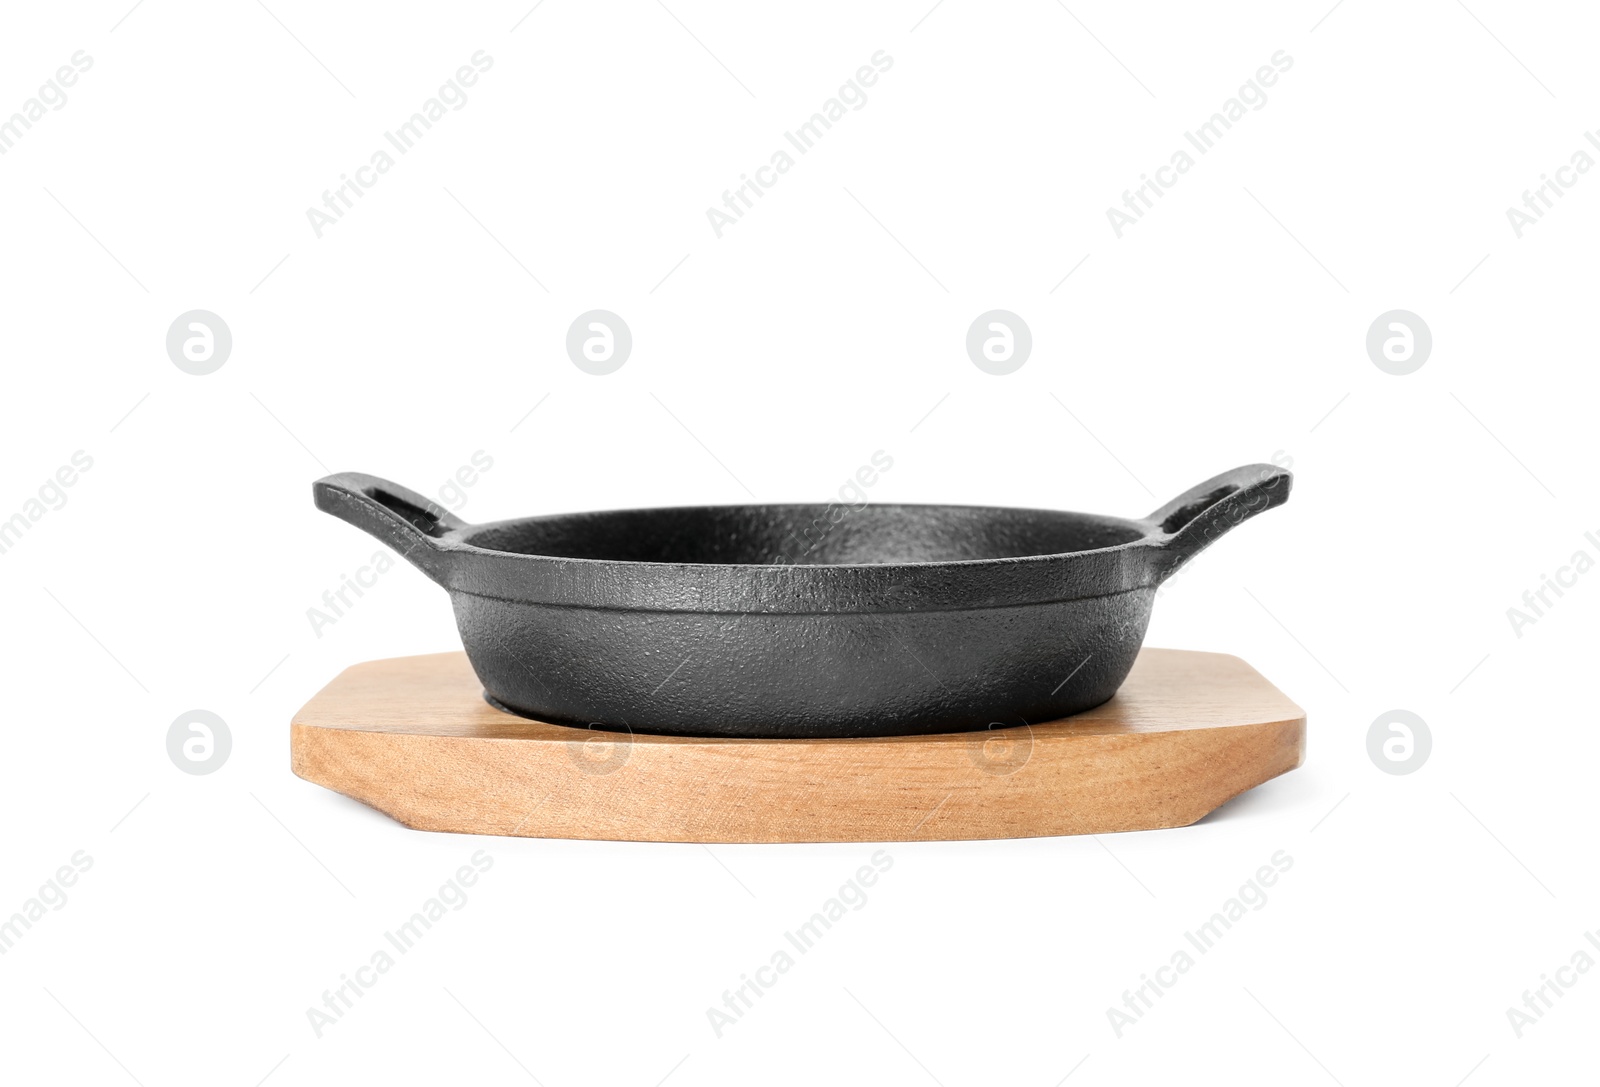 Photo of Frying pan and wooden board isolated on white. Cooking utensils